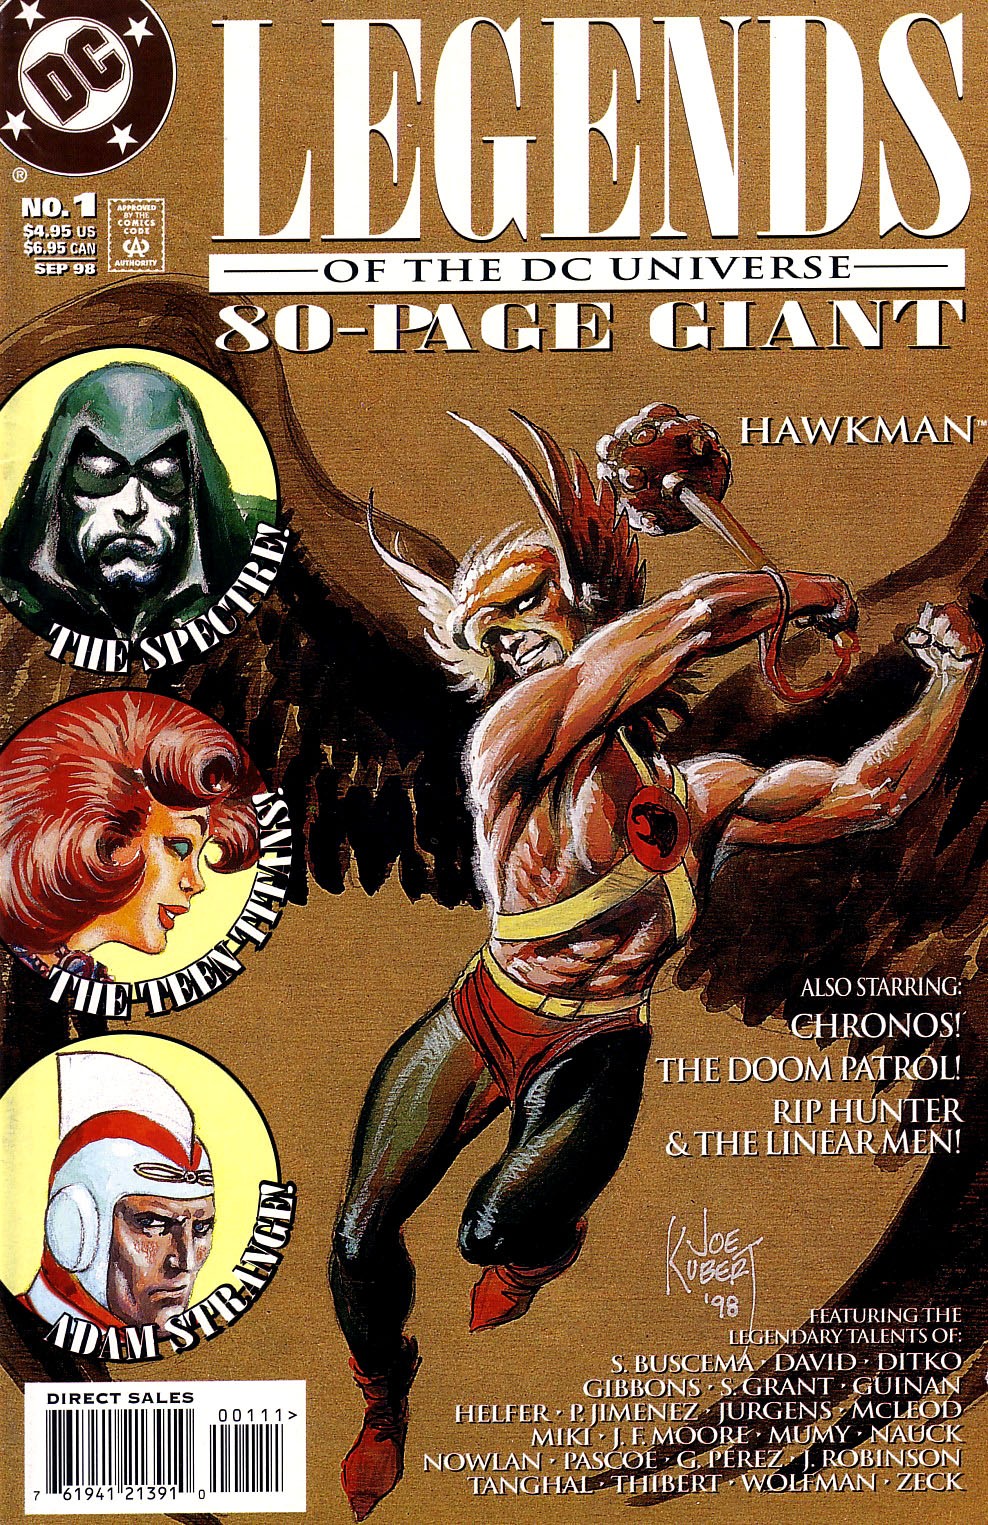 Read online Legends of the DC Universe 80-Page Giant comic -  Issue #1 - 1